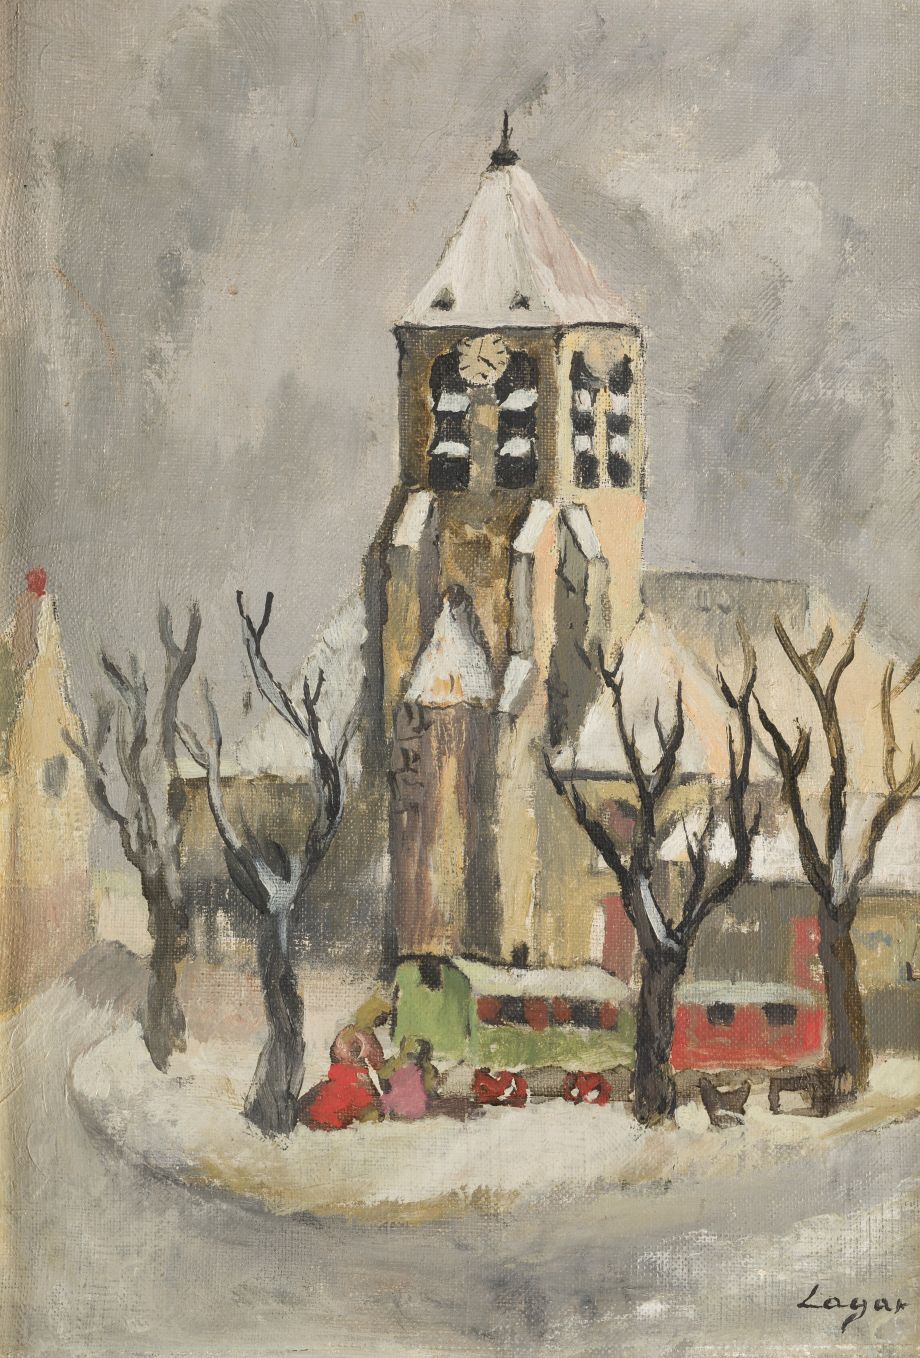 CELSO LAGAR (1891 / 1966) "Rouloutes in front of the church" Signé dans le coin &hellip;